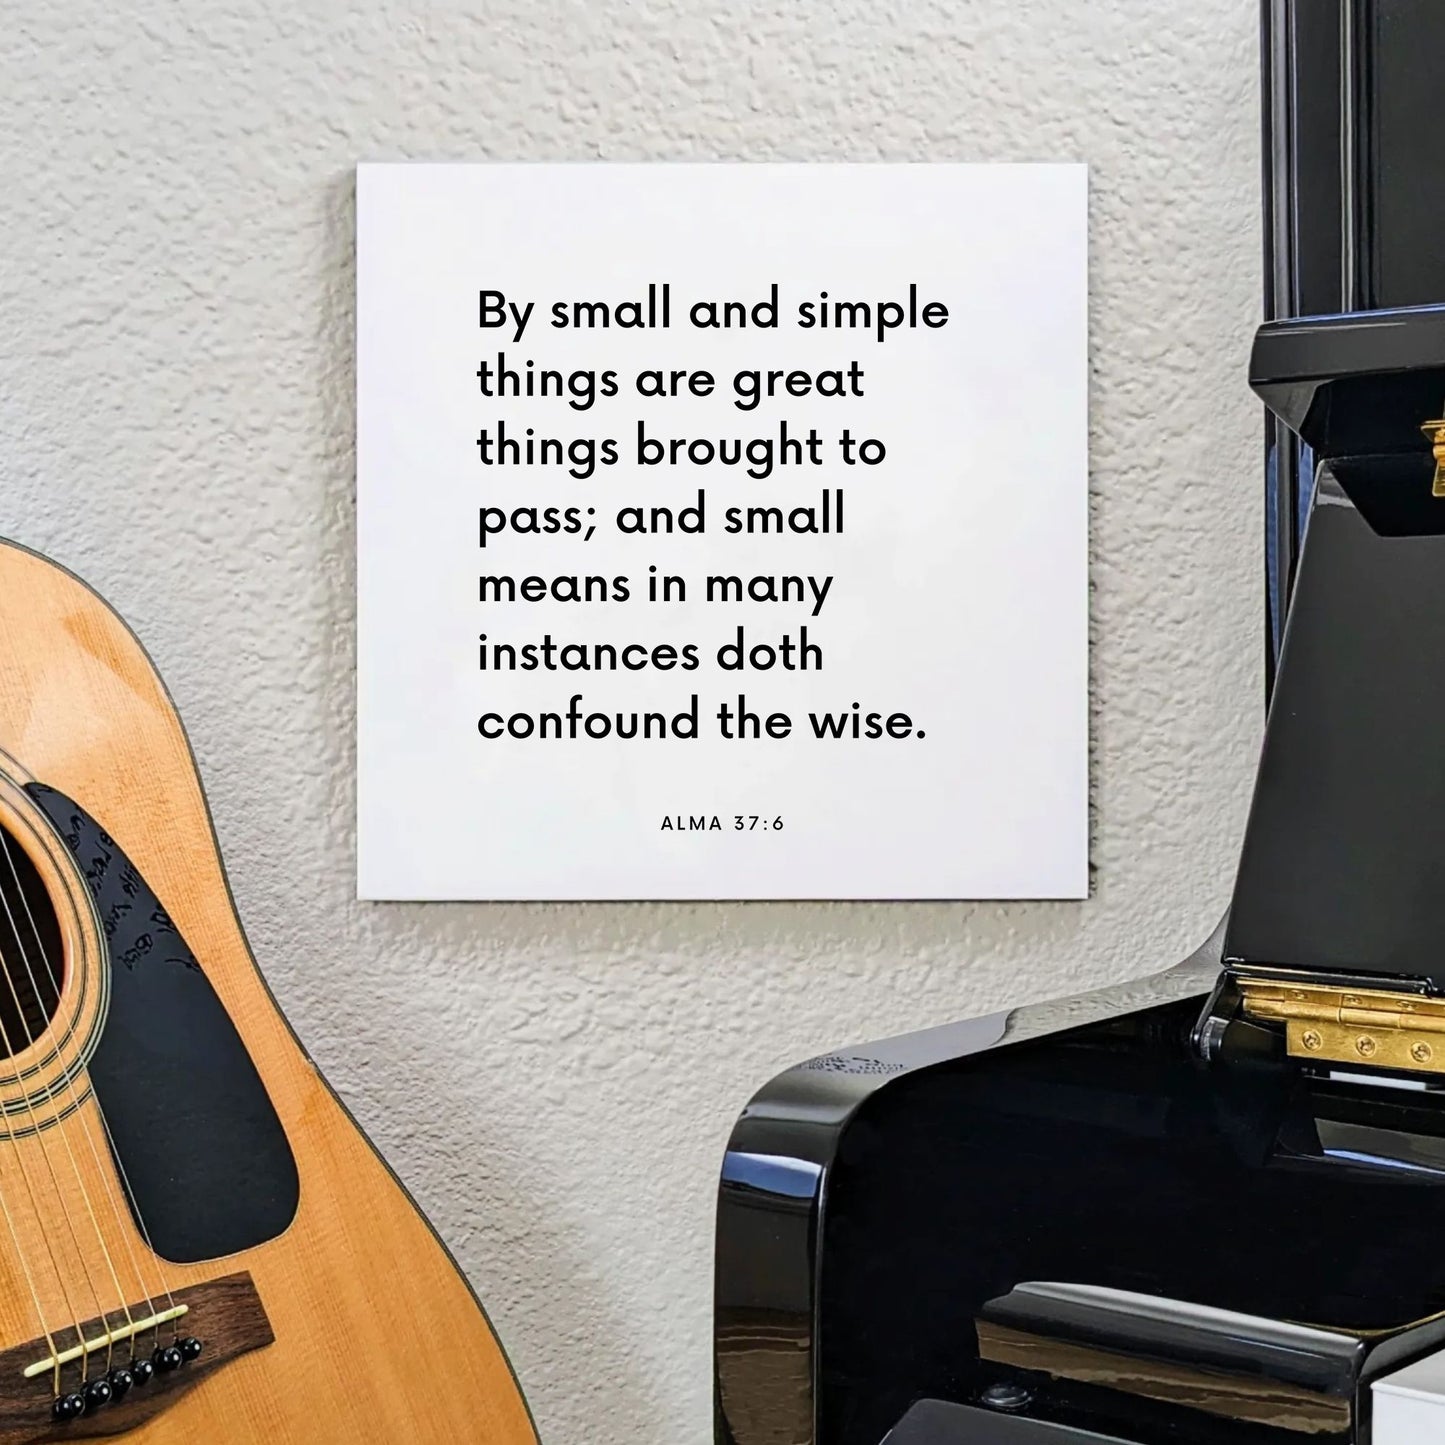 Music mouting of the scripture tile for Alma 37:6 - "By small and simple things are great things brought to pass"